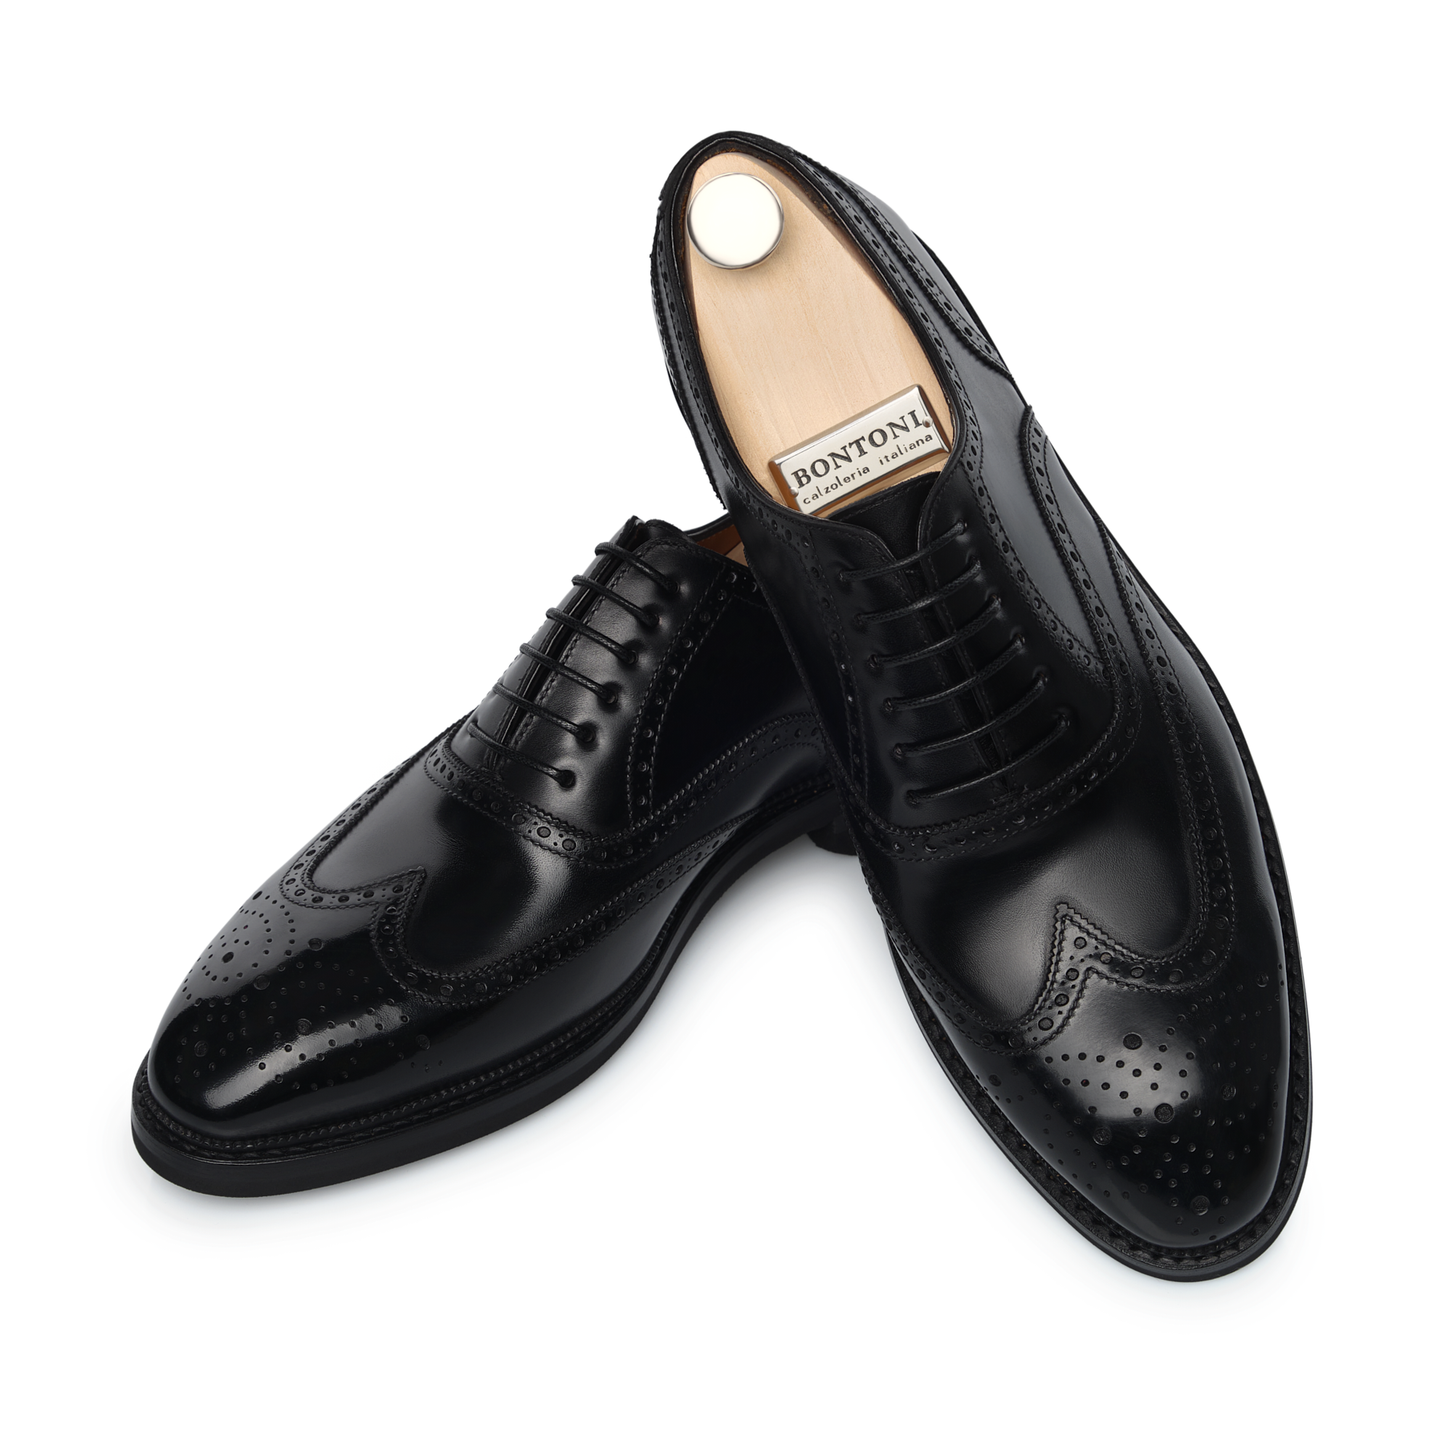 "Libertino" Six-Eyelet Leather Oxford Shoes with Hand-Punched Details and Medallion in Black